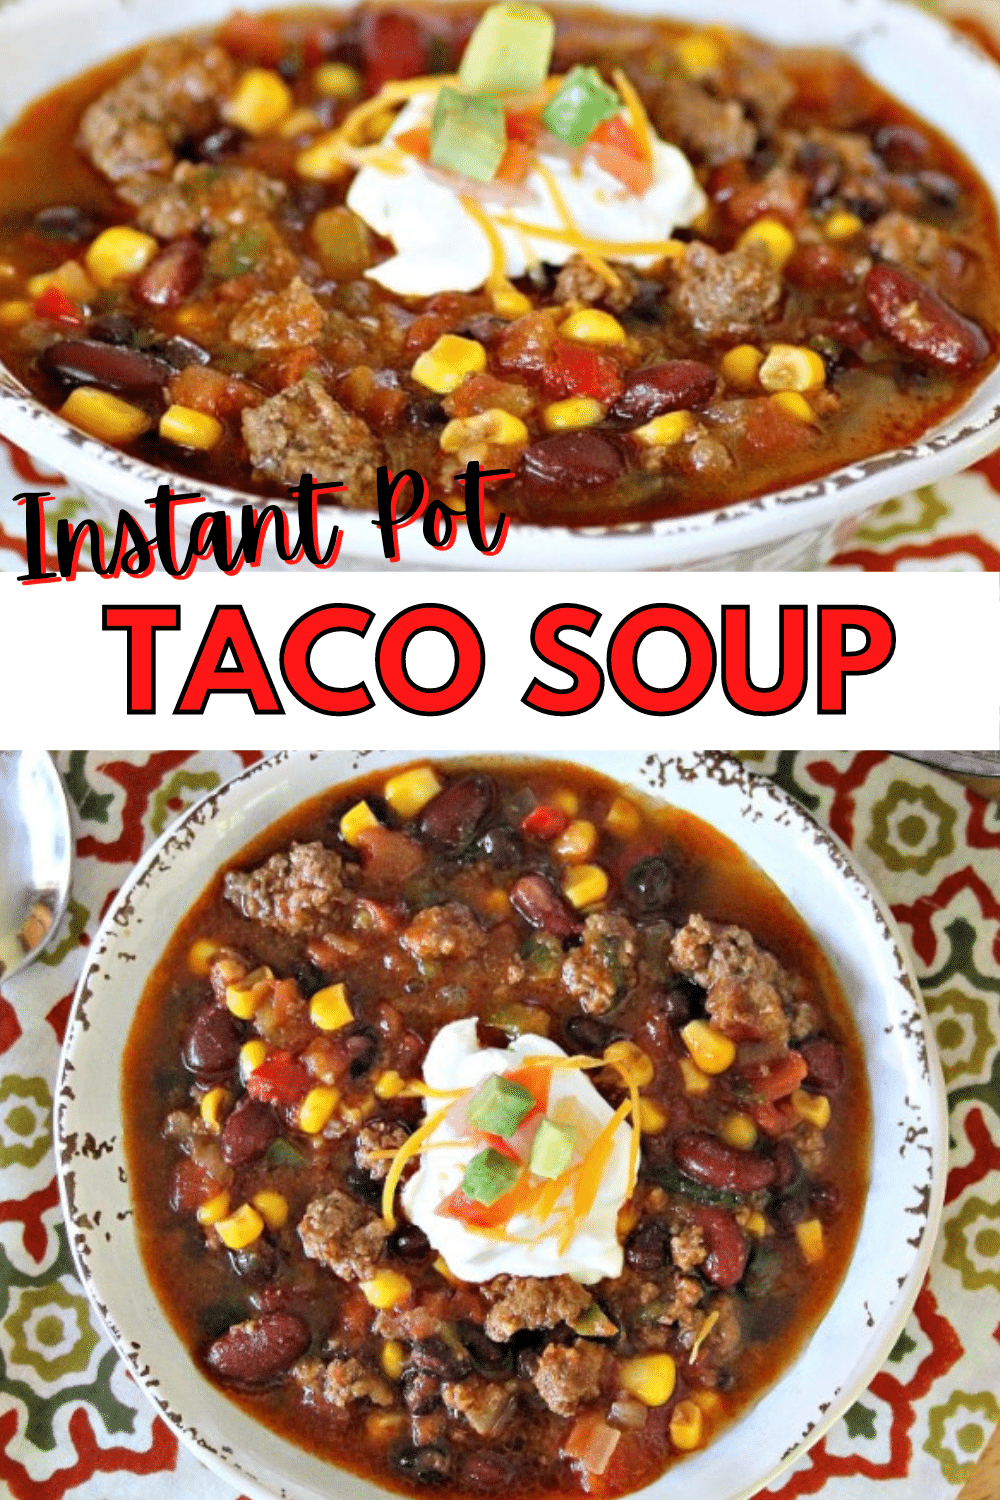 top image is a closeup of Instant Pot Taco Soup in a white bowl, bottom image is an overhead view of Instant Pot Taco Soup in a white bowl